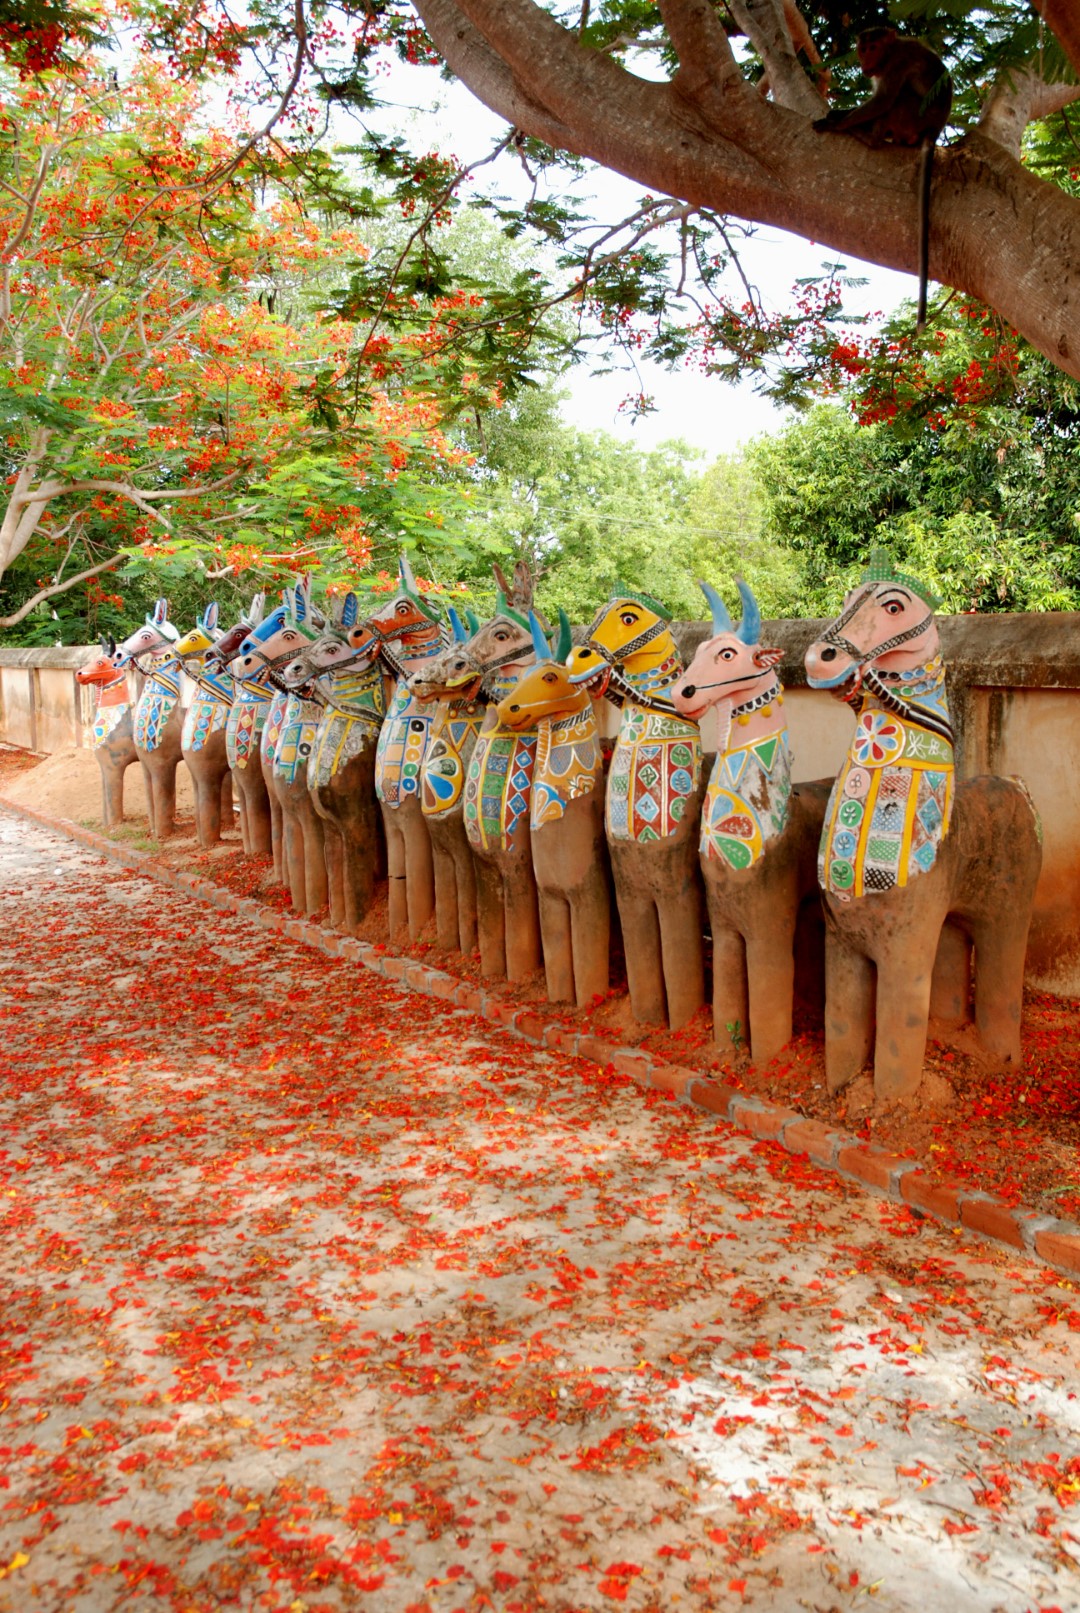 <span style="font-weight:normal;">A line of horses and cows inside a small walled temple complex. The flamboyant tree has shed many of its appropriately named flowers, creating a vivid red carpet.</span>